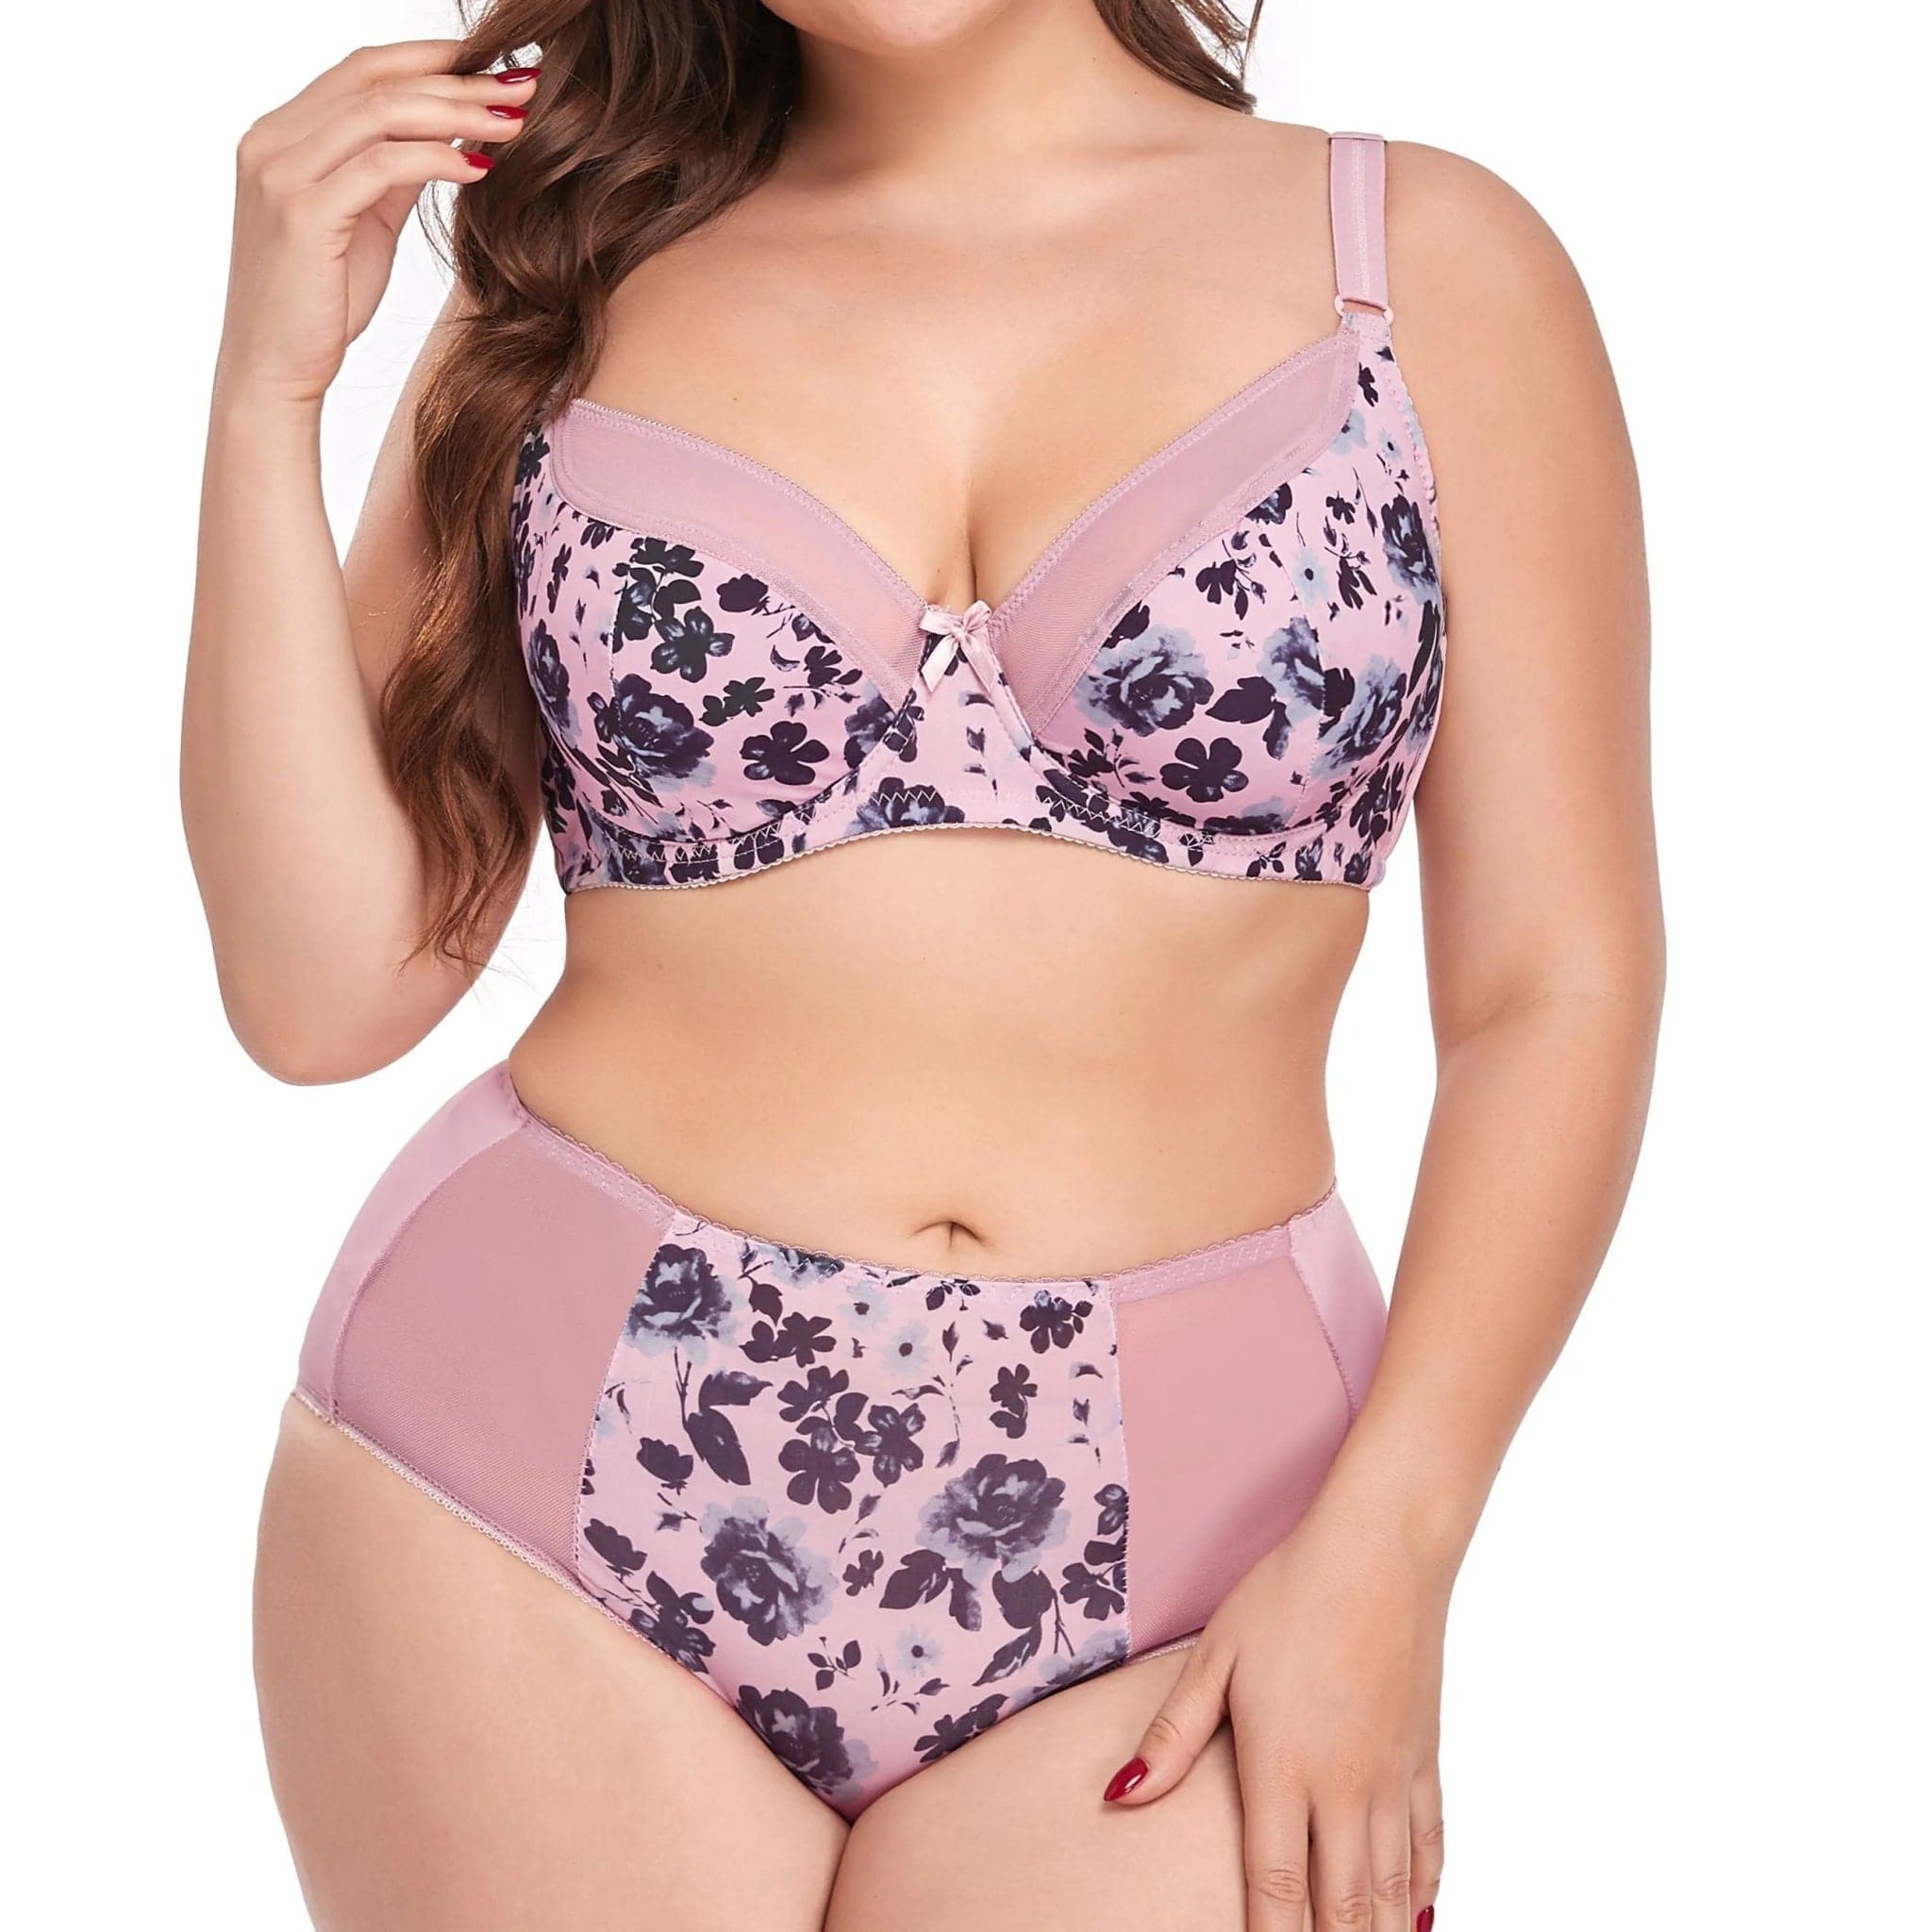 Women's Floral Bra and Brief Set - PariFairy, Underwire, Ultra-Thin - Wandering Woman